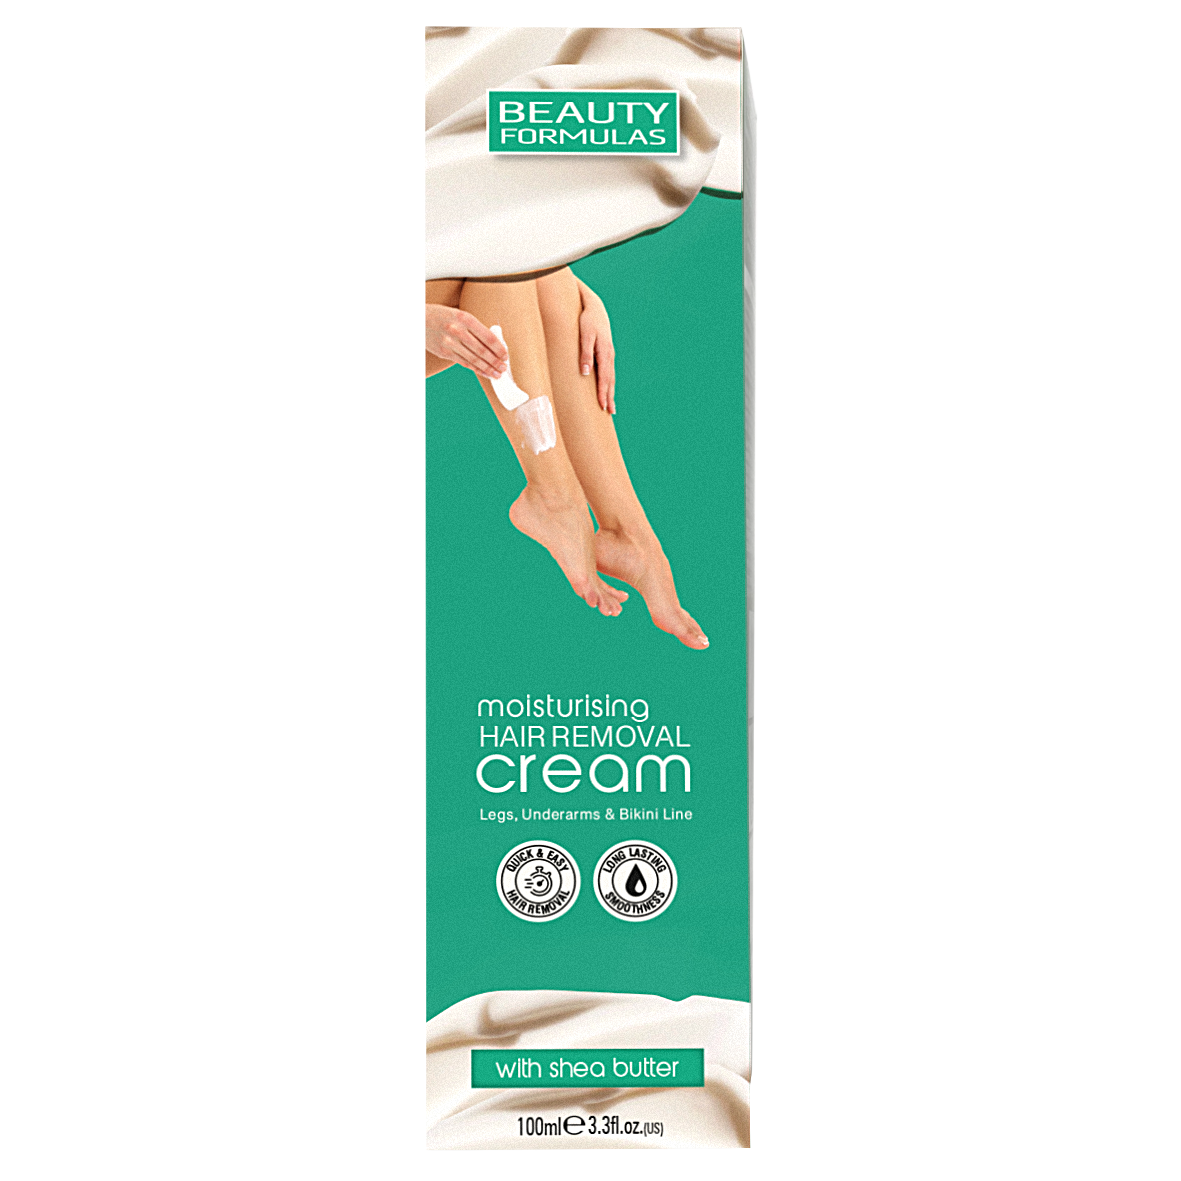 Beauty formulas moisturising hair removal cream with Shea butter.